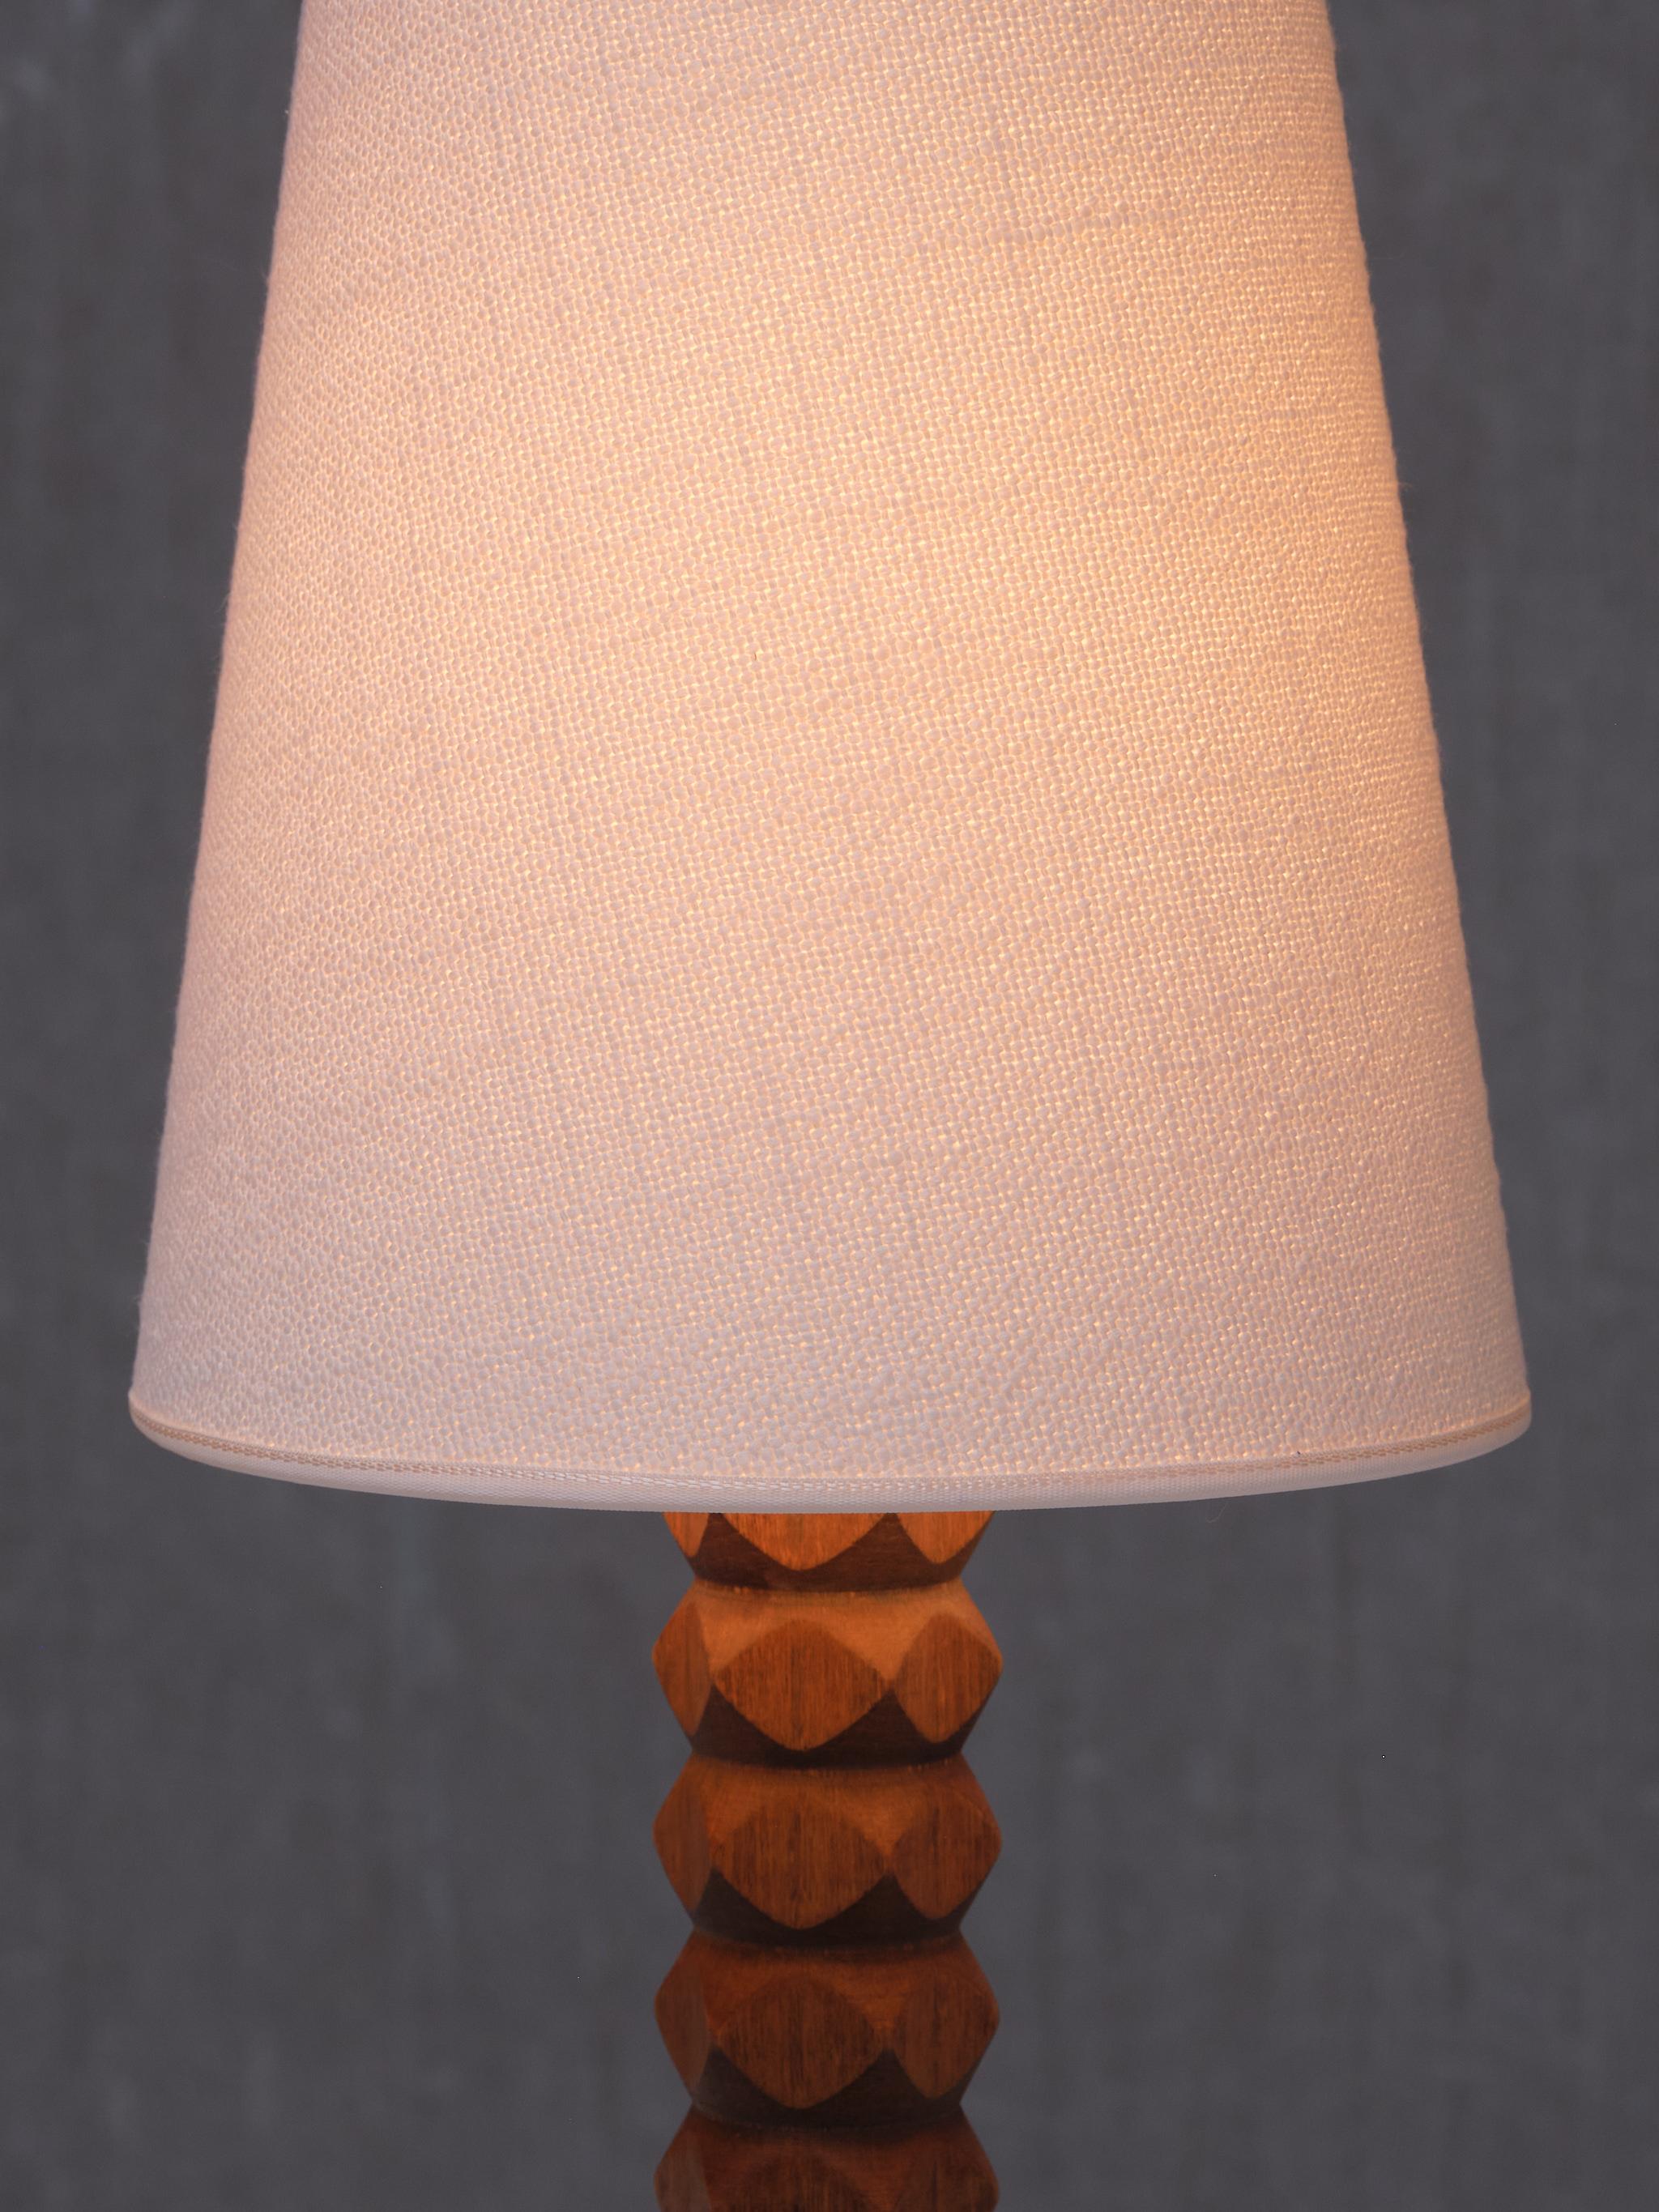 Charles Dudouyt Attributed Table Lamp in Oak with Ivory Shade, France, 1950s For Sale 2